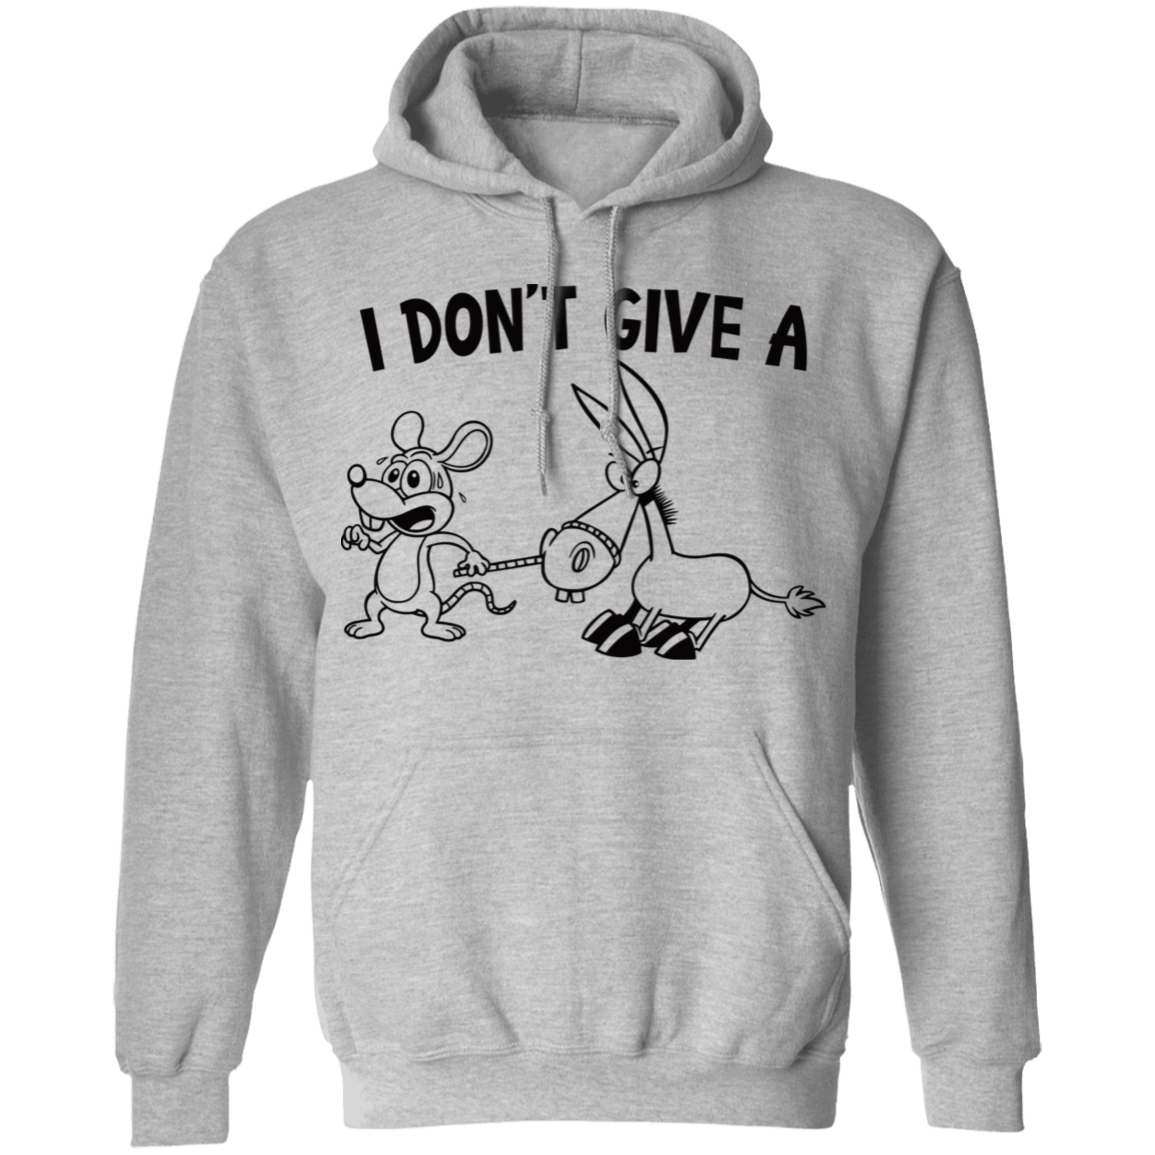 Don't give a rat's - hoodie